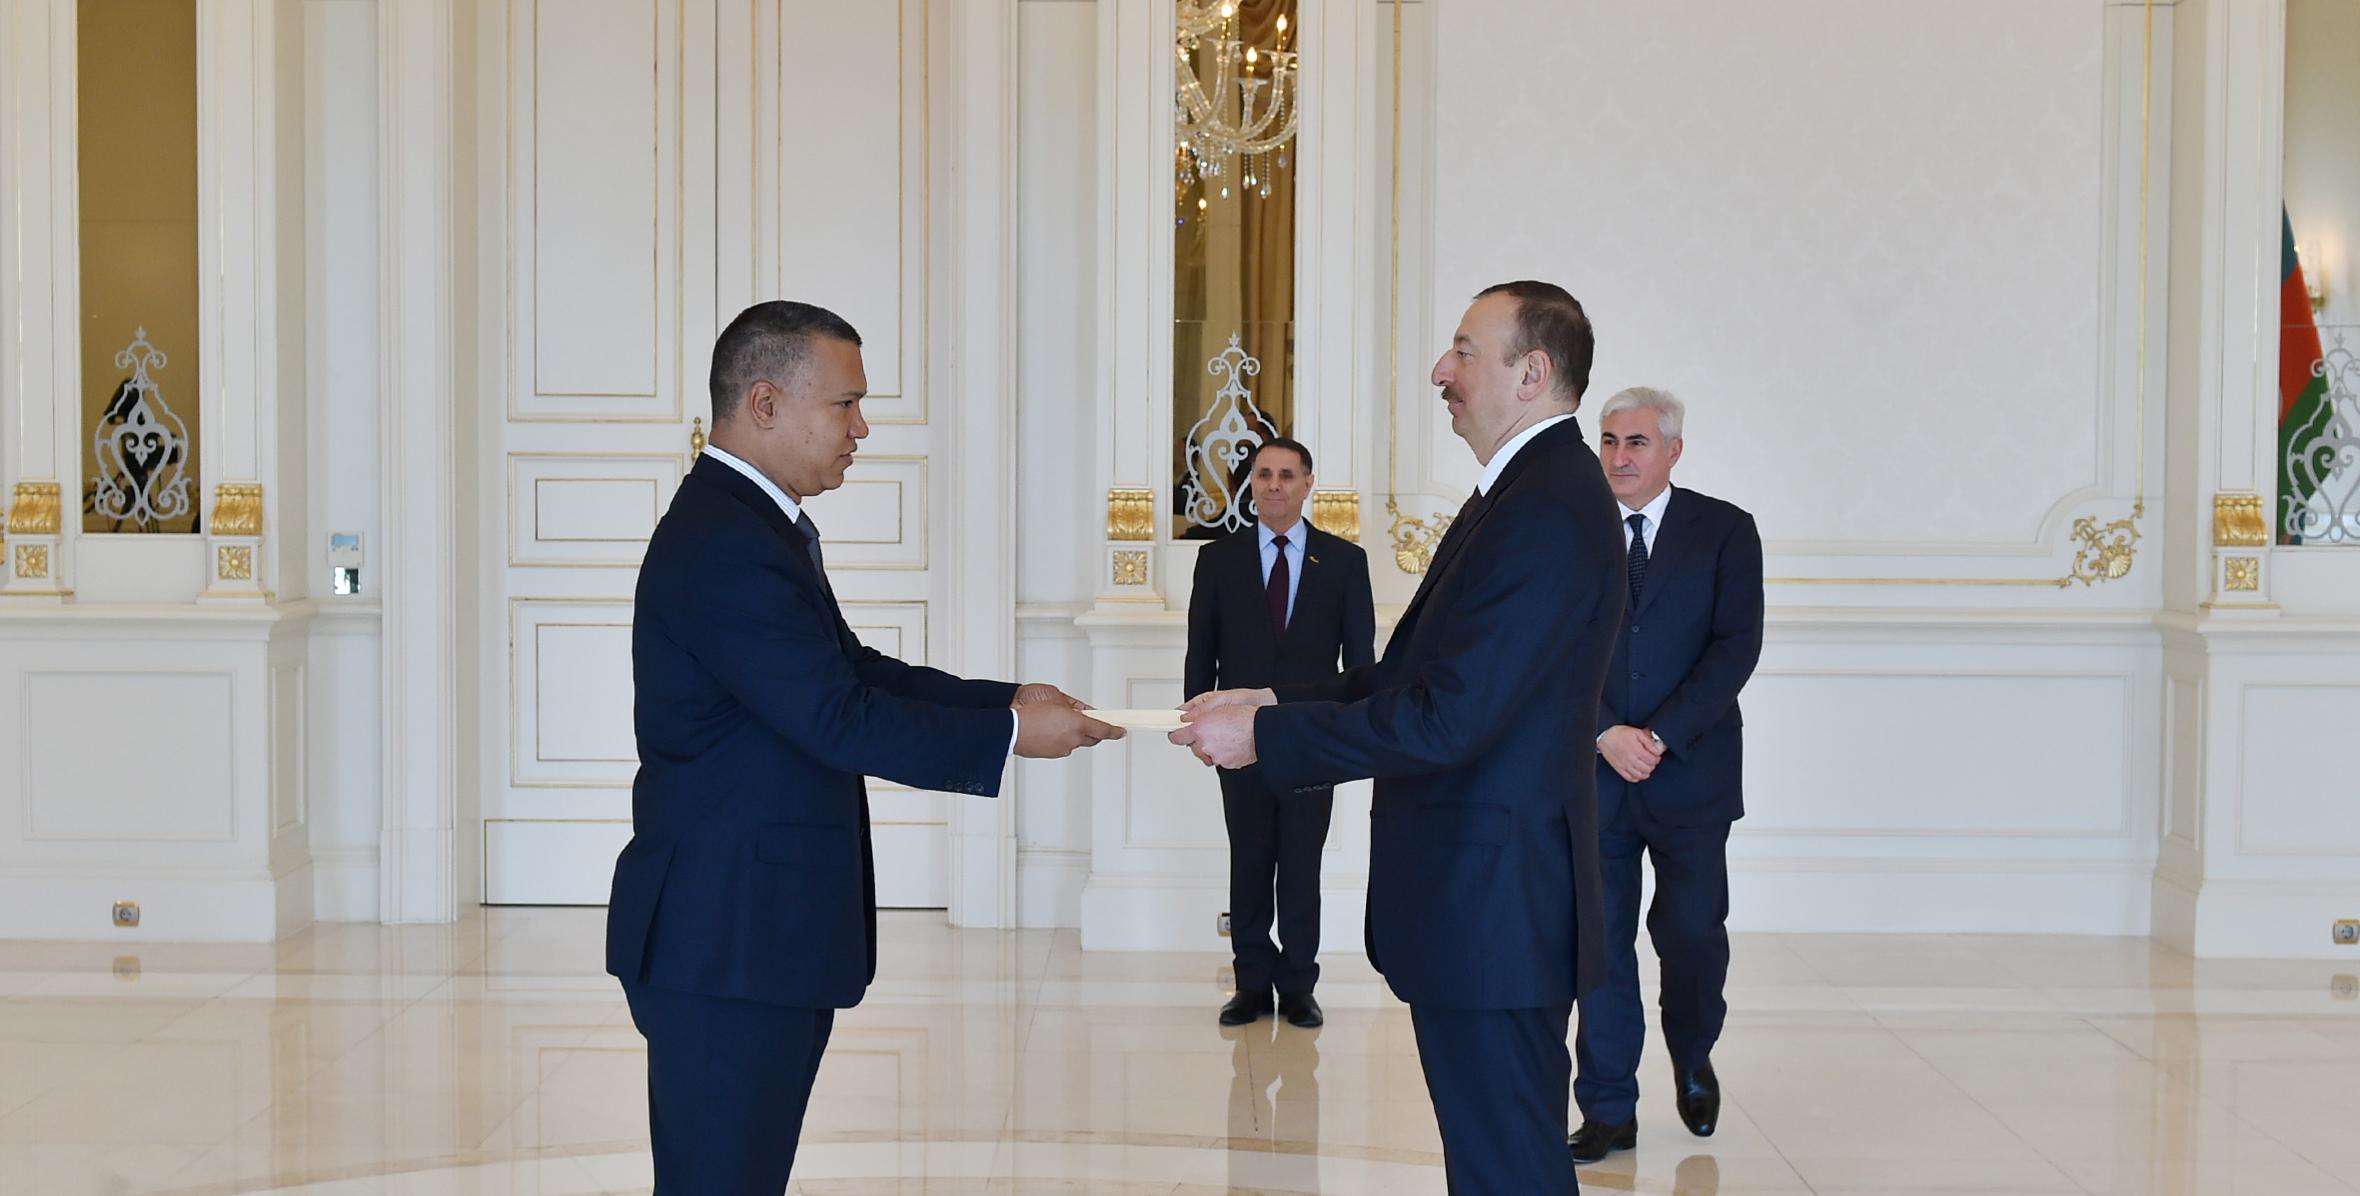 Ilham Aliyev received the credentials of the newly-appointed Ambassador of Venezuela